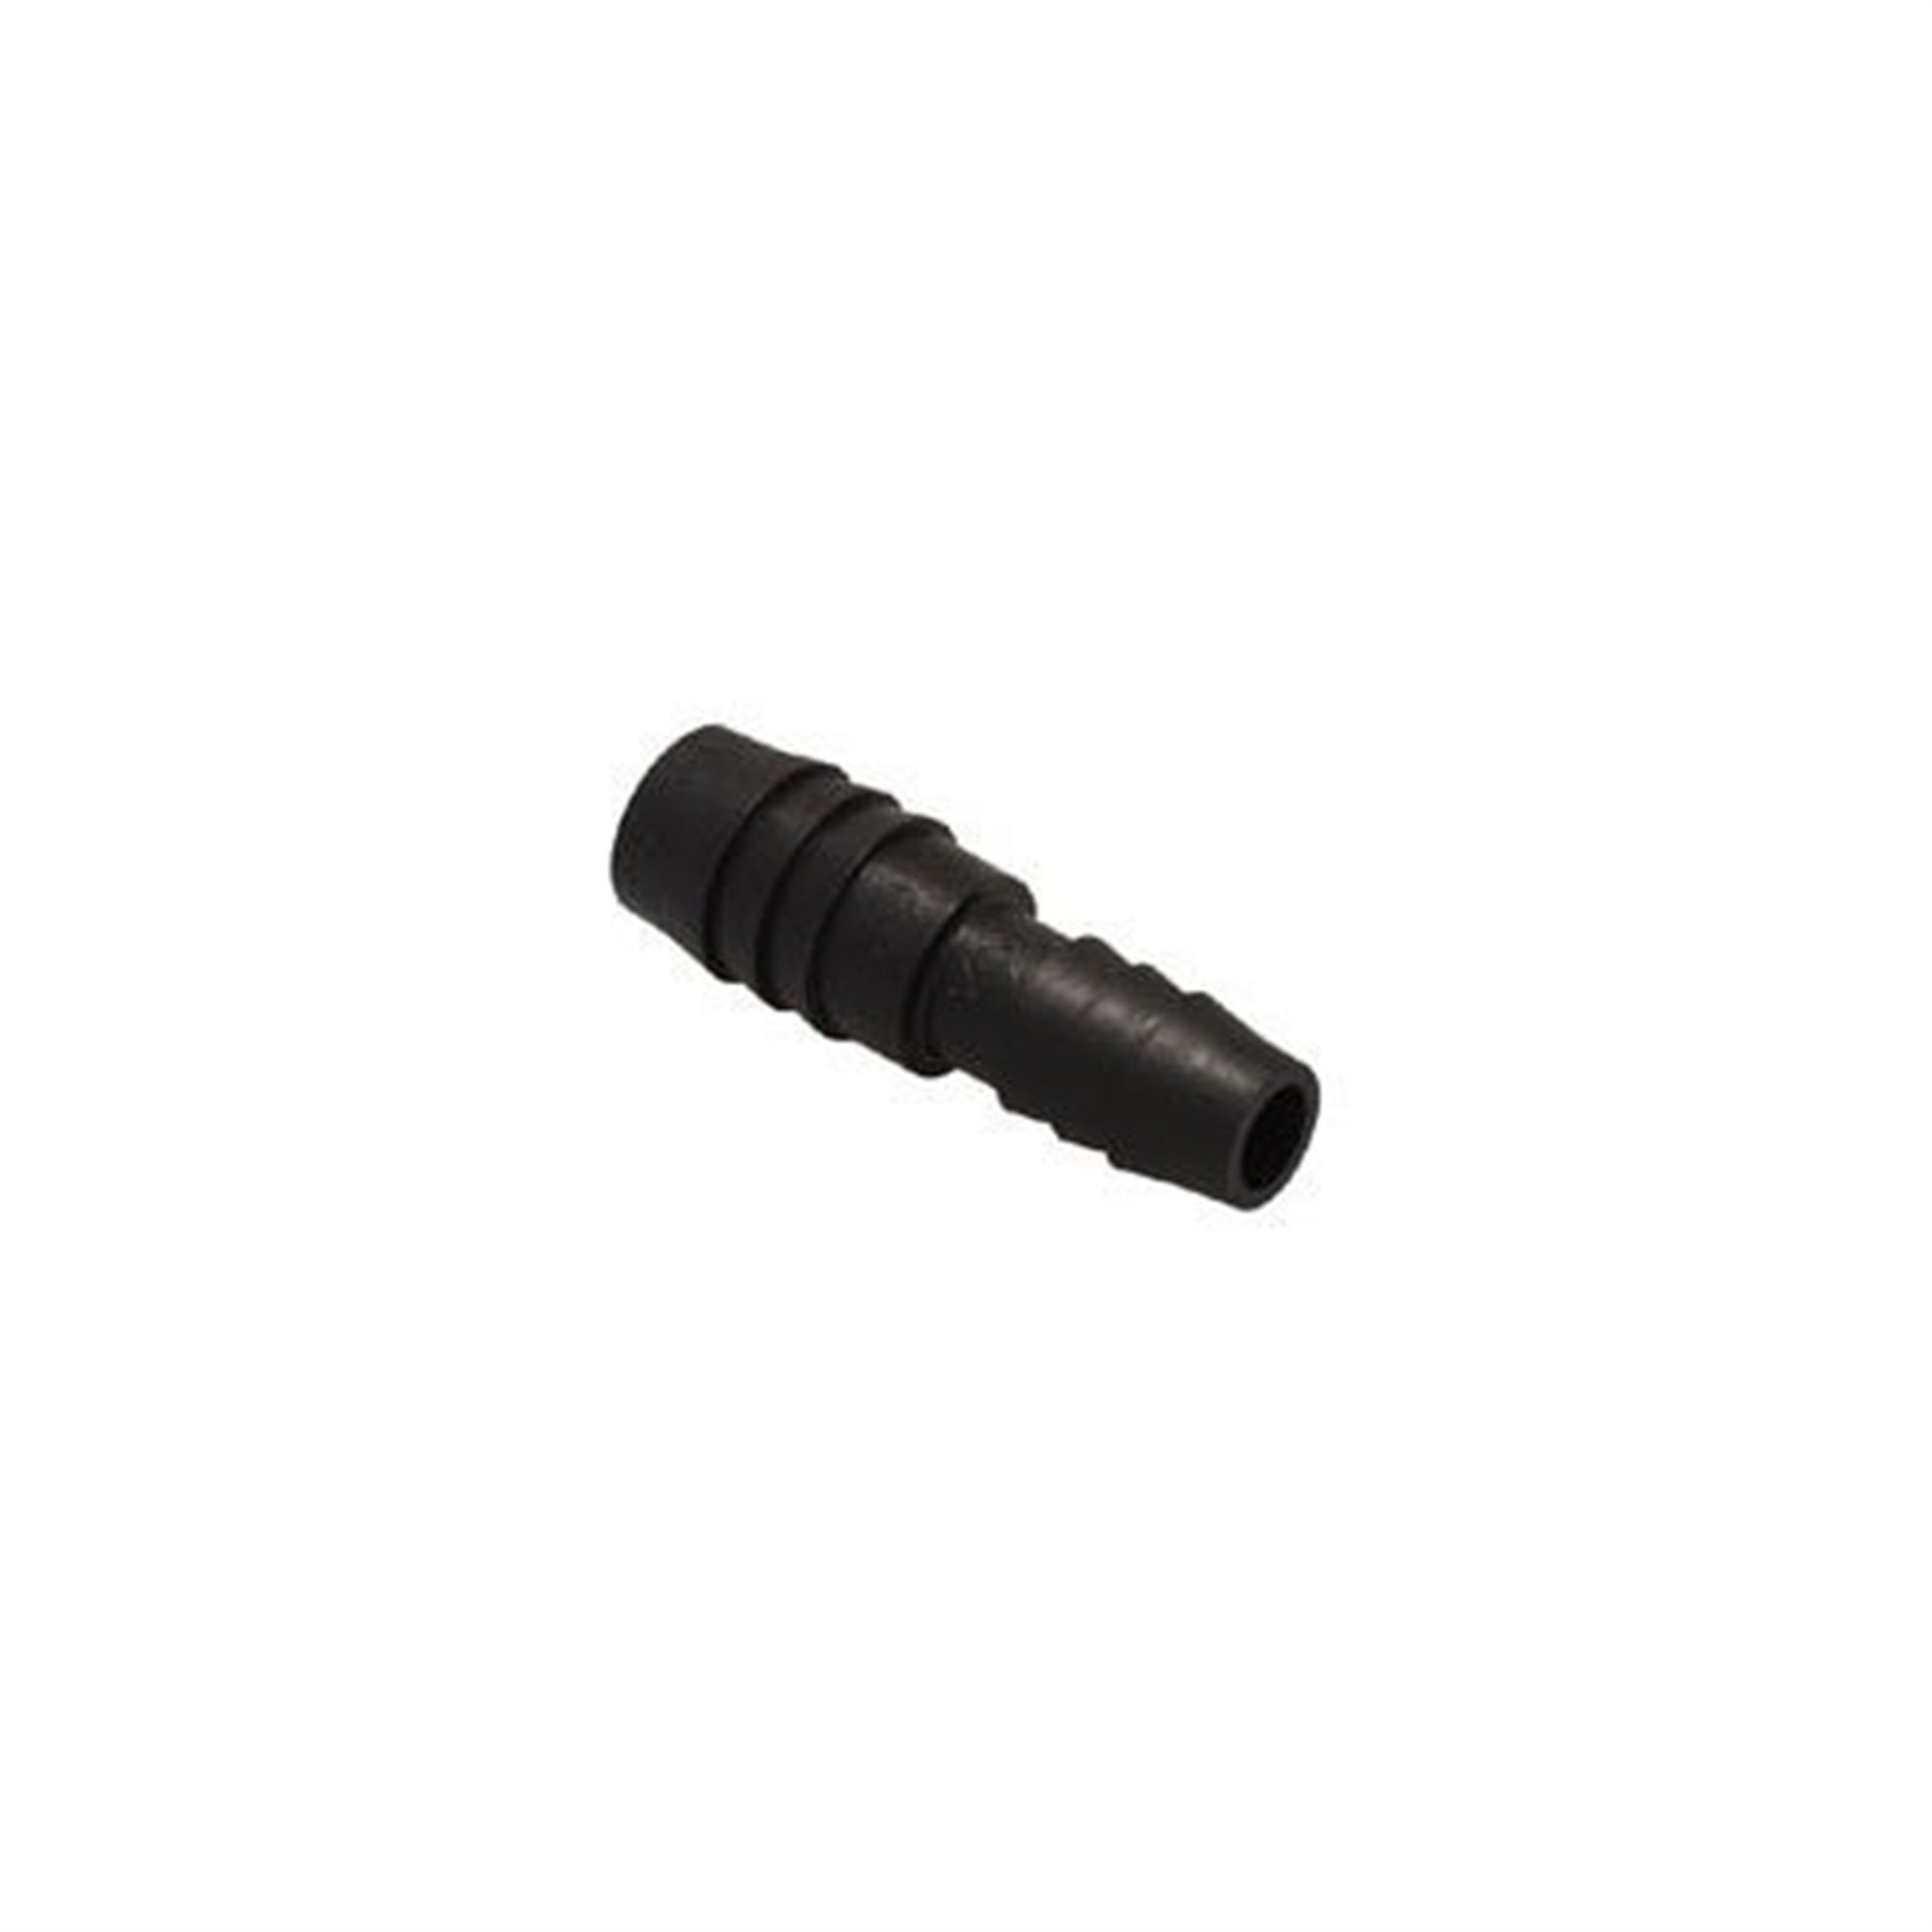 Danner 12885 1/2-Inch by 3/8-Inch Hose Barb Coupling